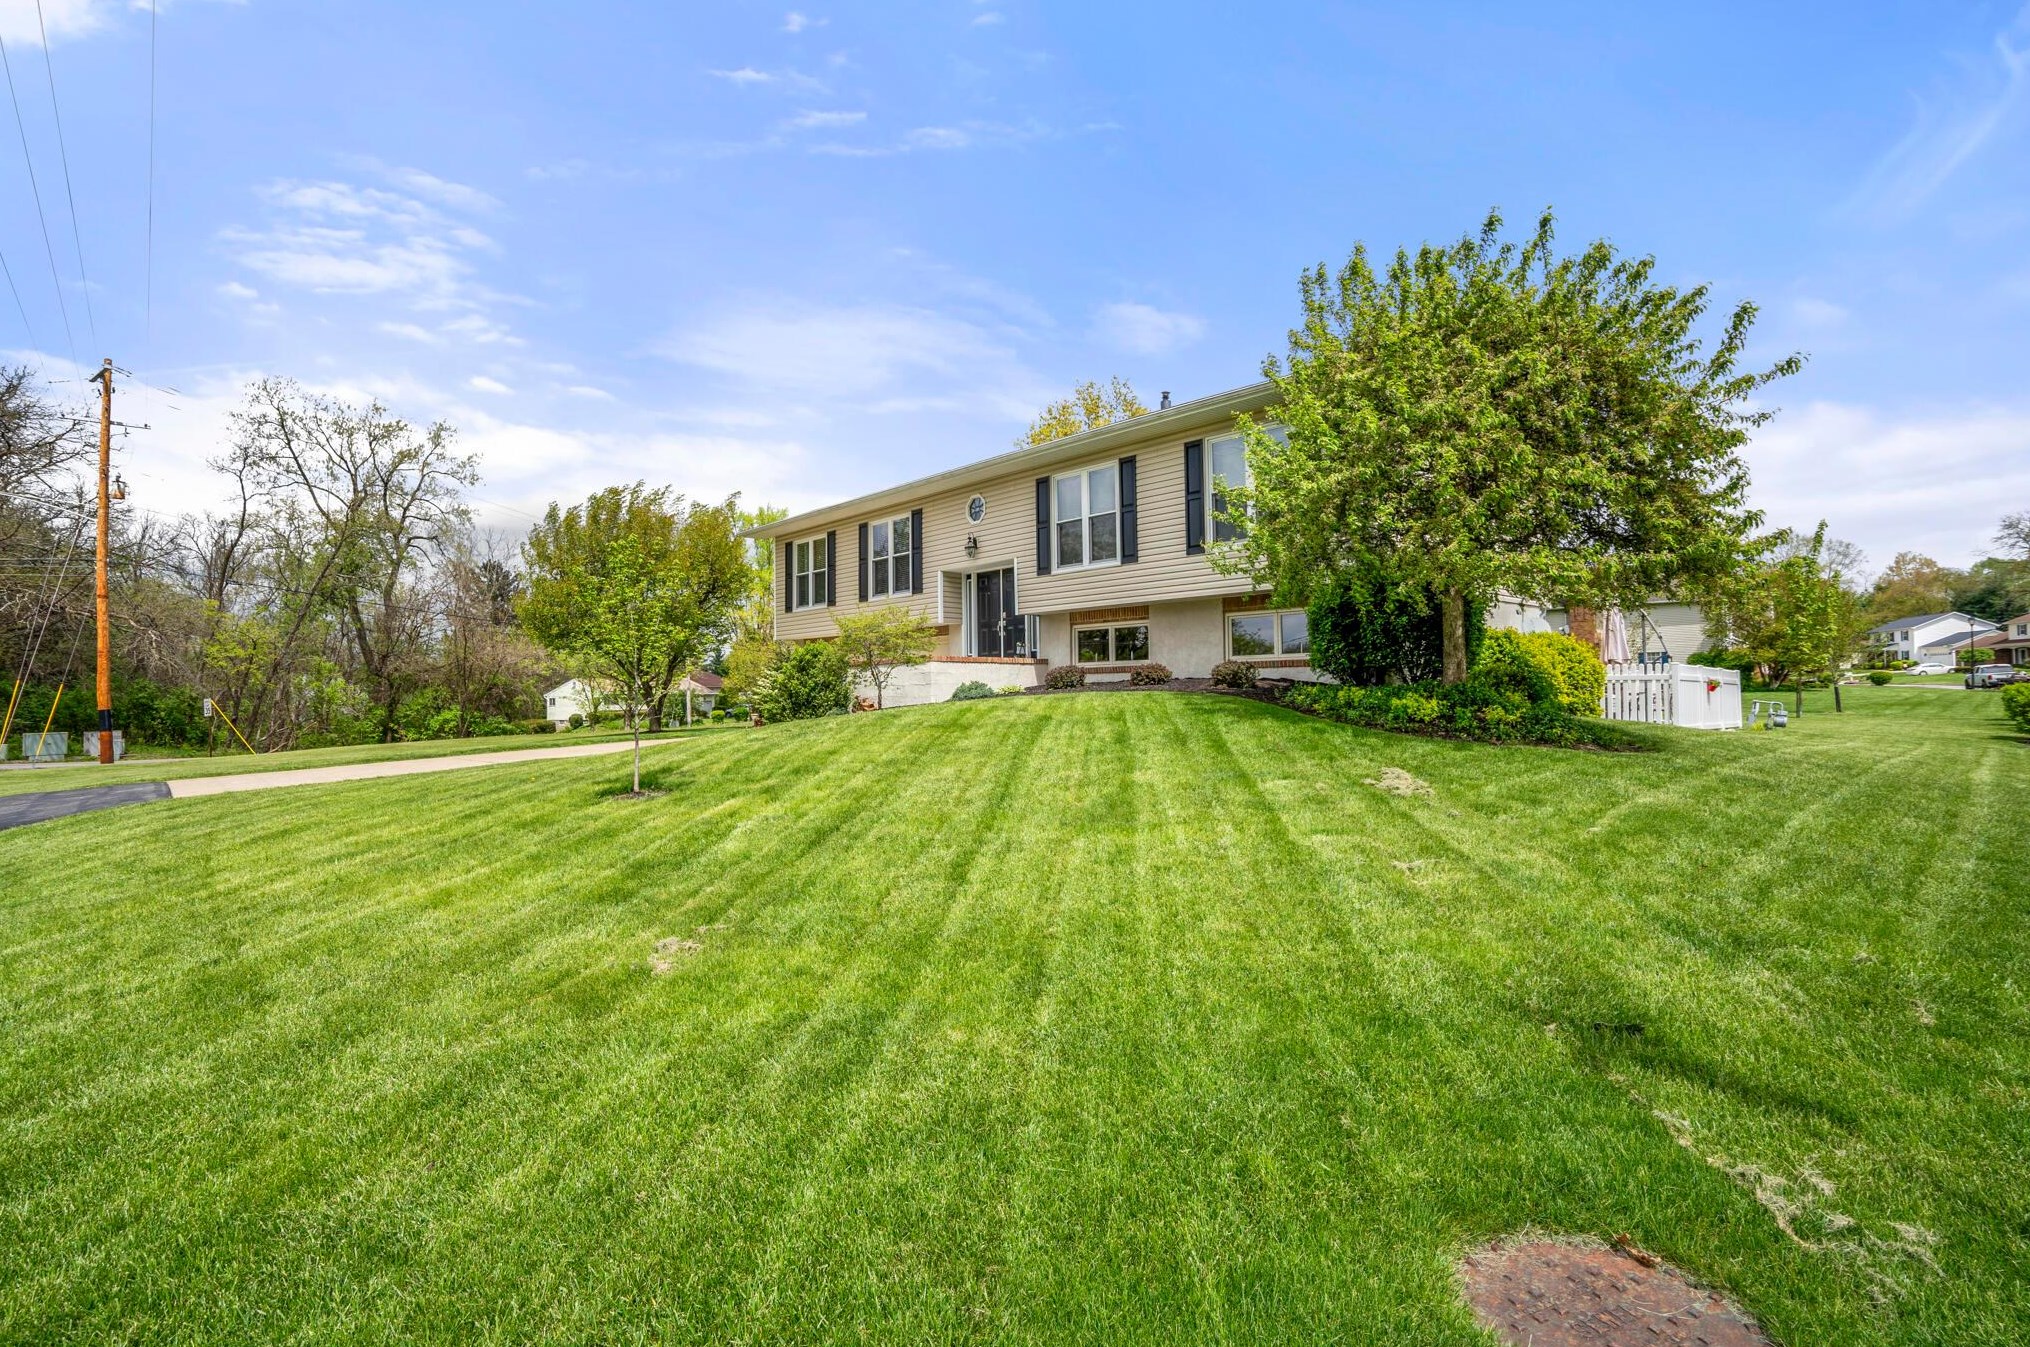 494 Sells Rd, Lancaster, OH 43130